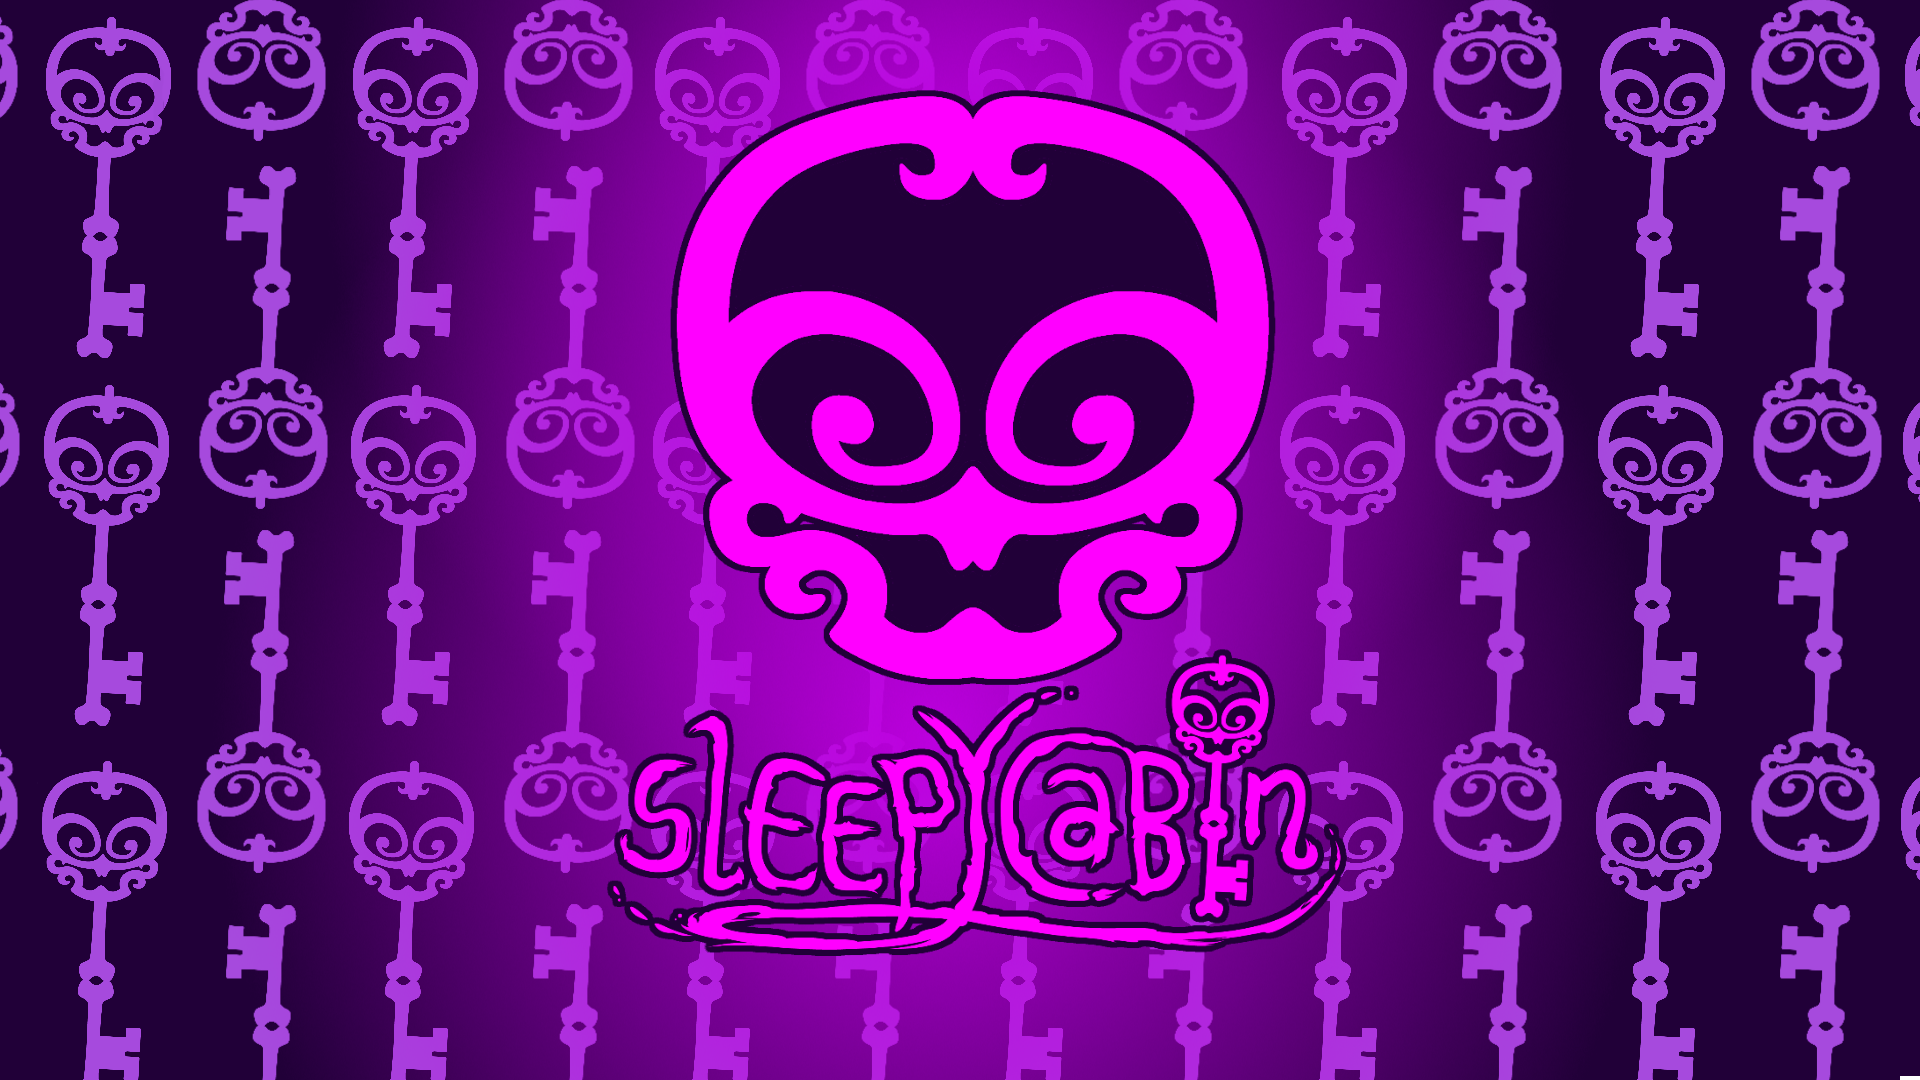 I Made A Sleepycabin Wallpaper, If Anyone Cares - Illustration , HD Wallpaper & Backgrounds